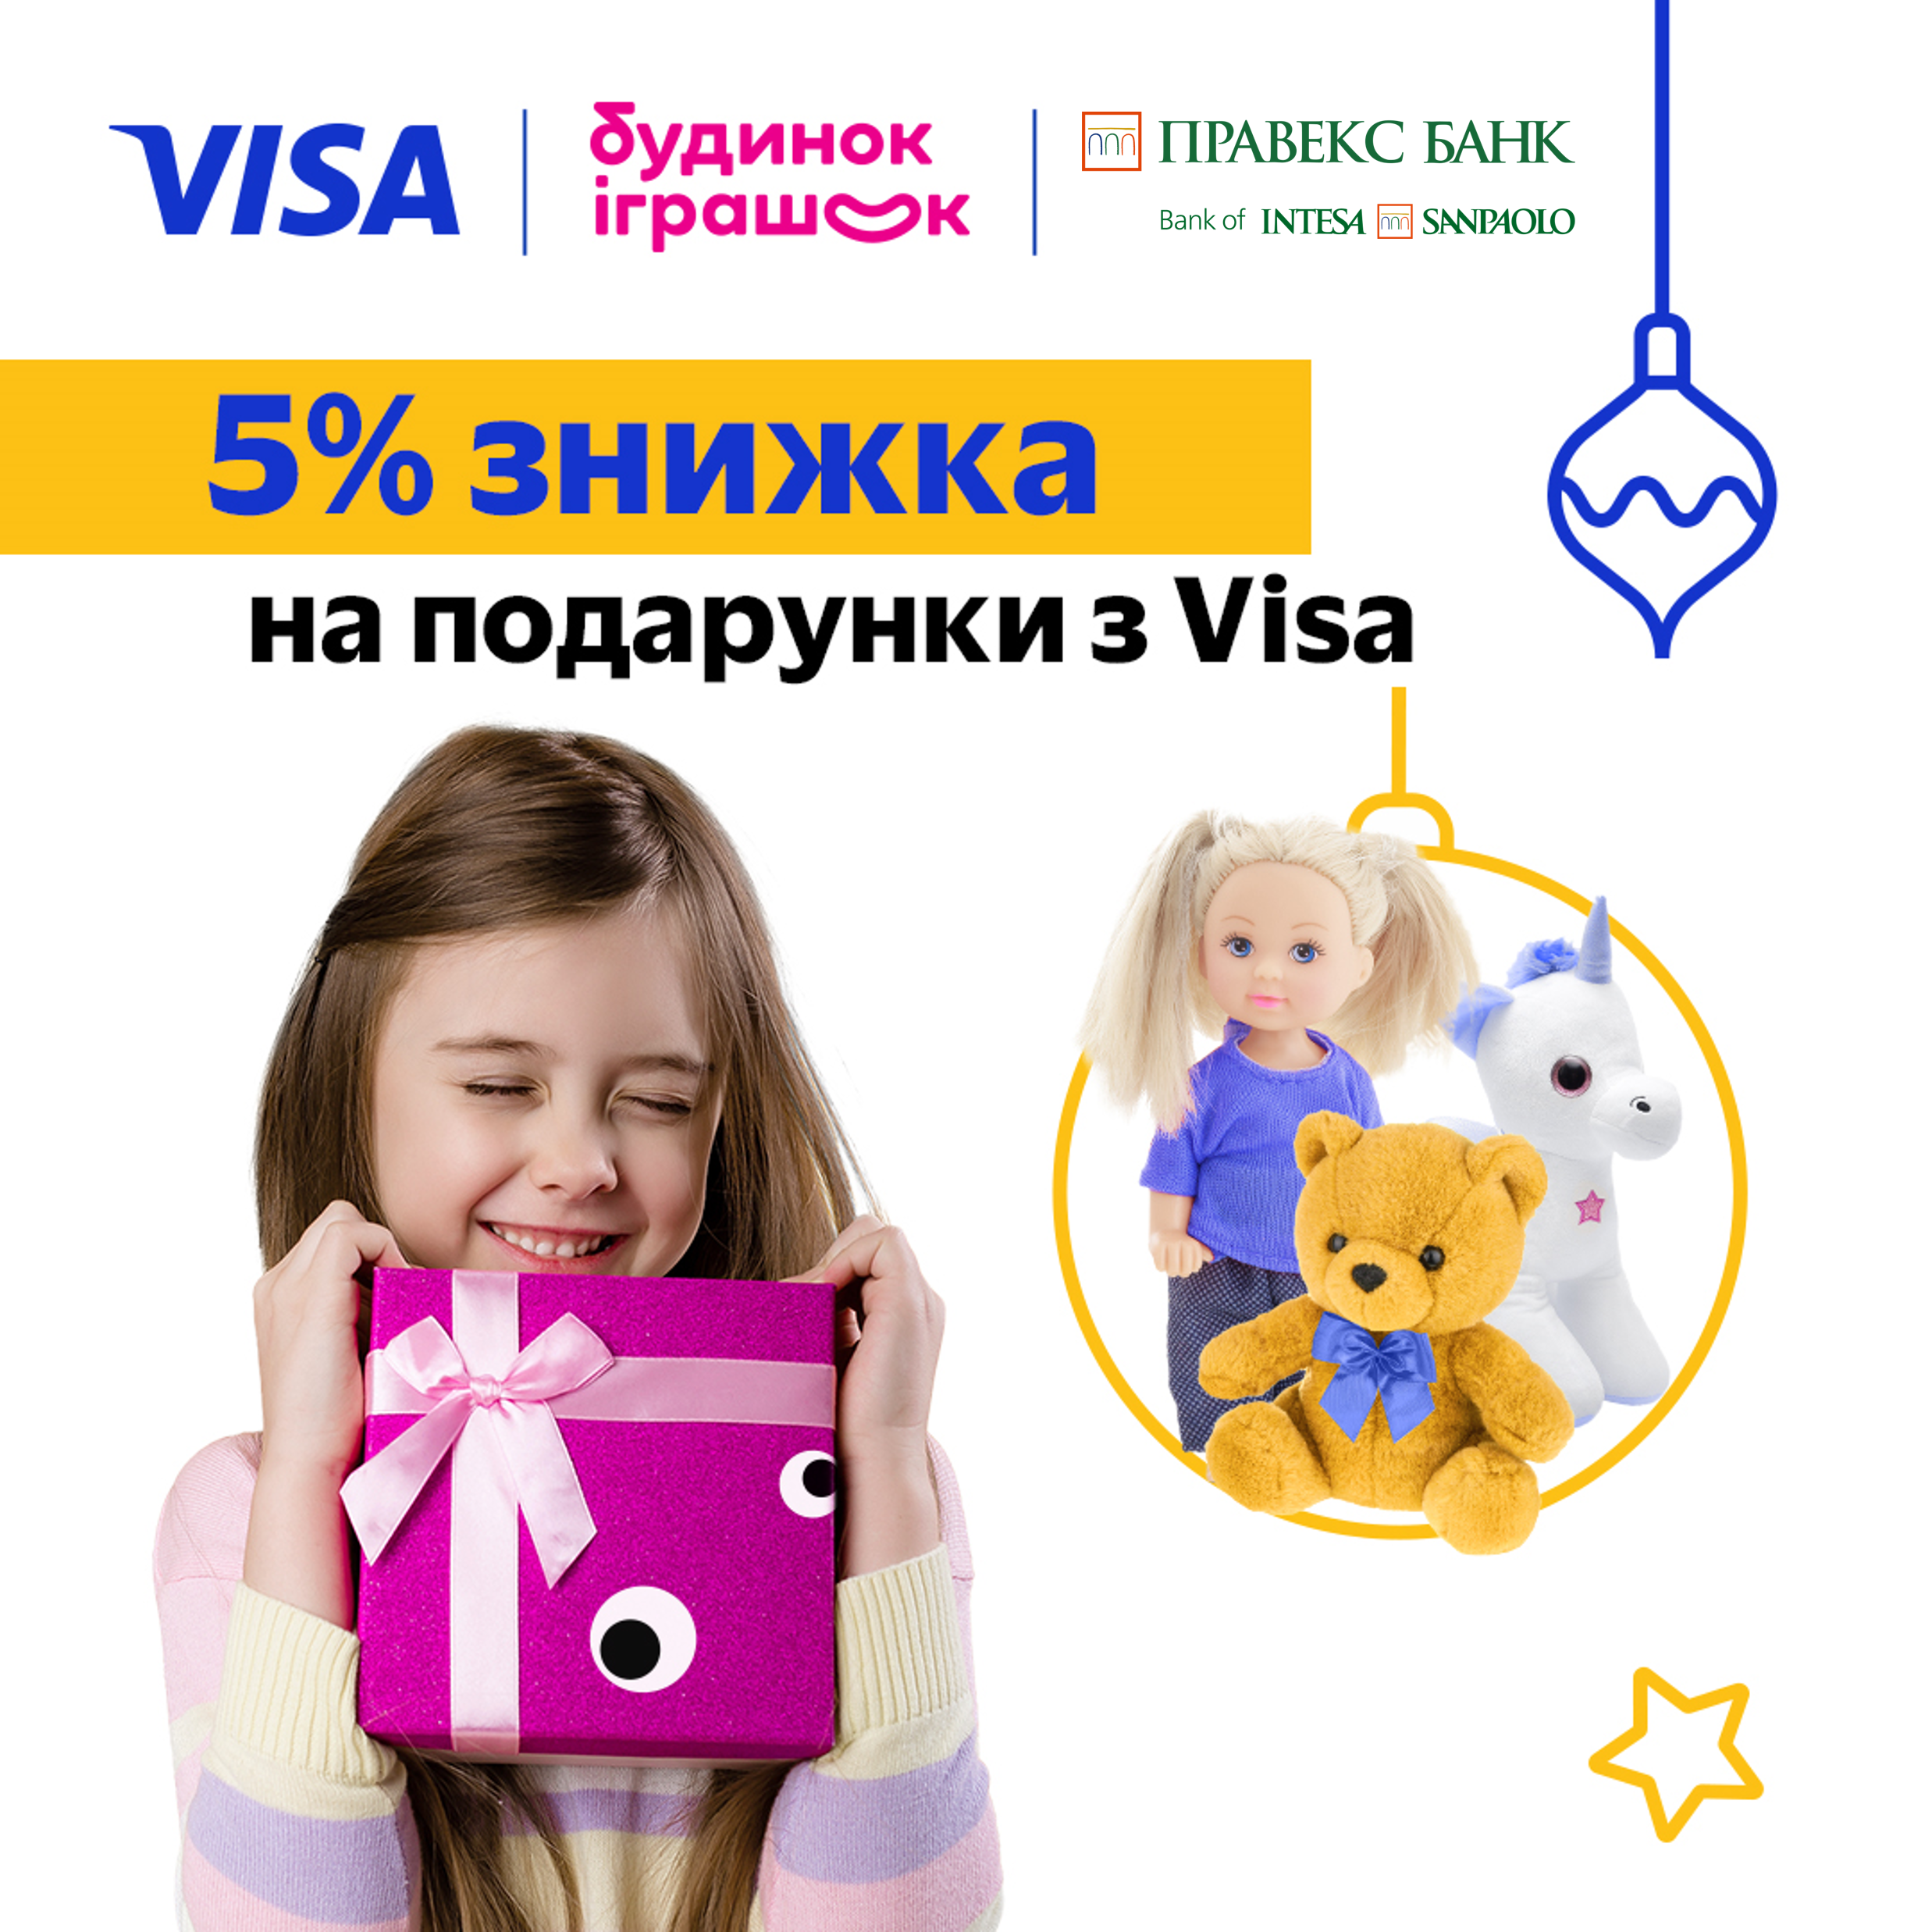 Additional 5% discount with Visa card in \